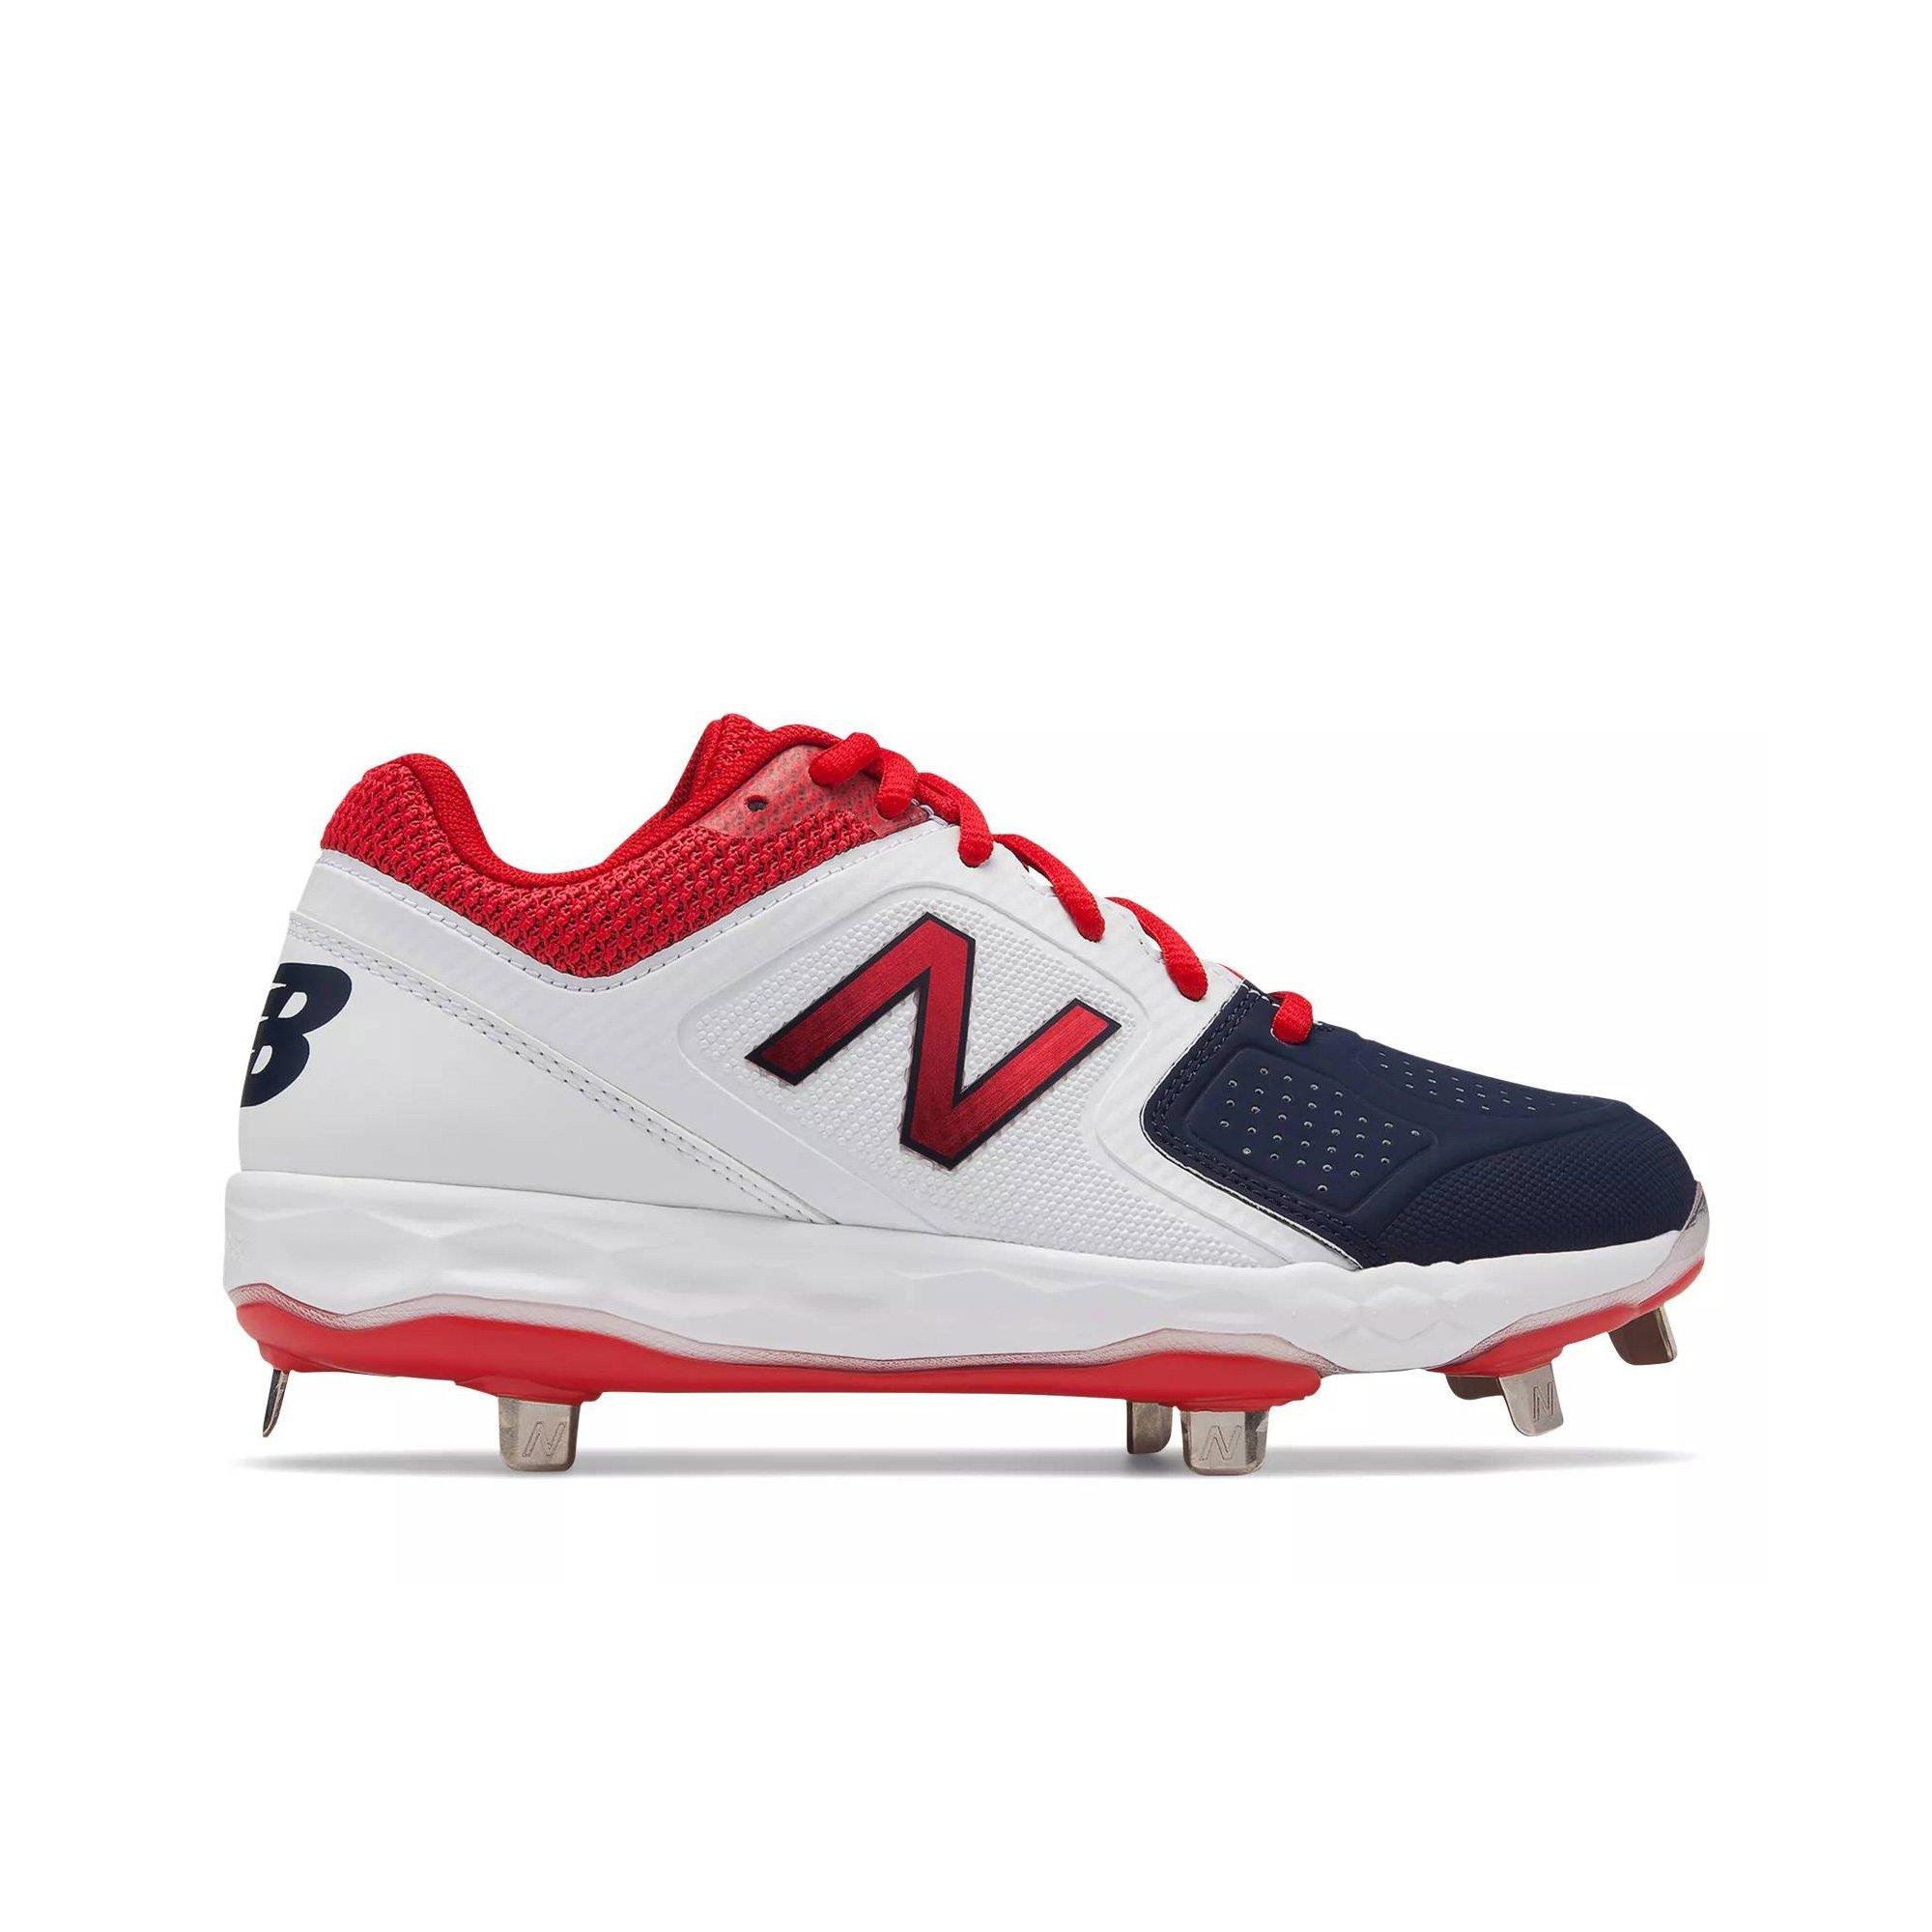 new balance baseball cleats red white and blue